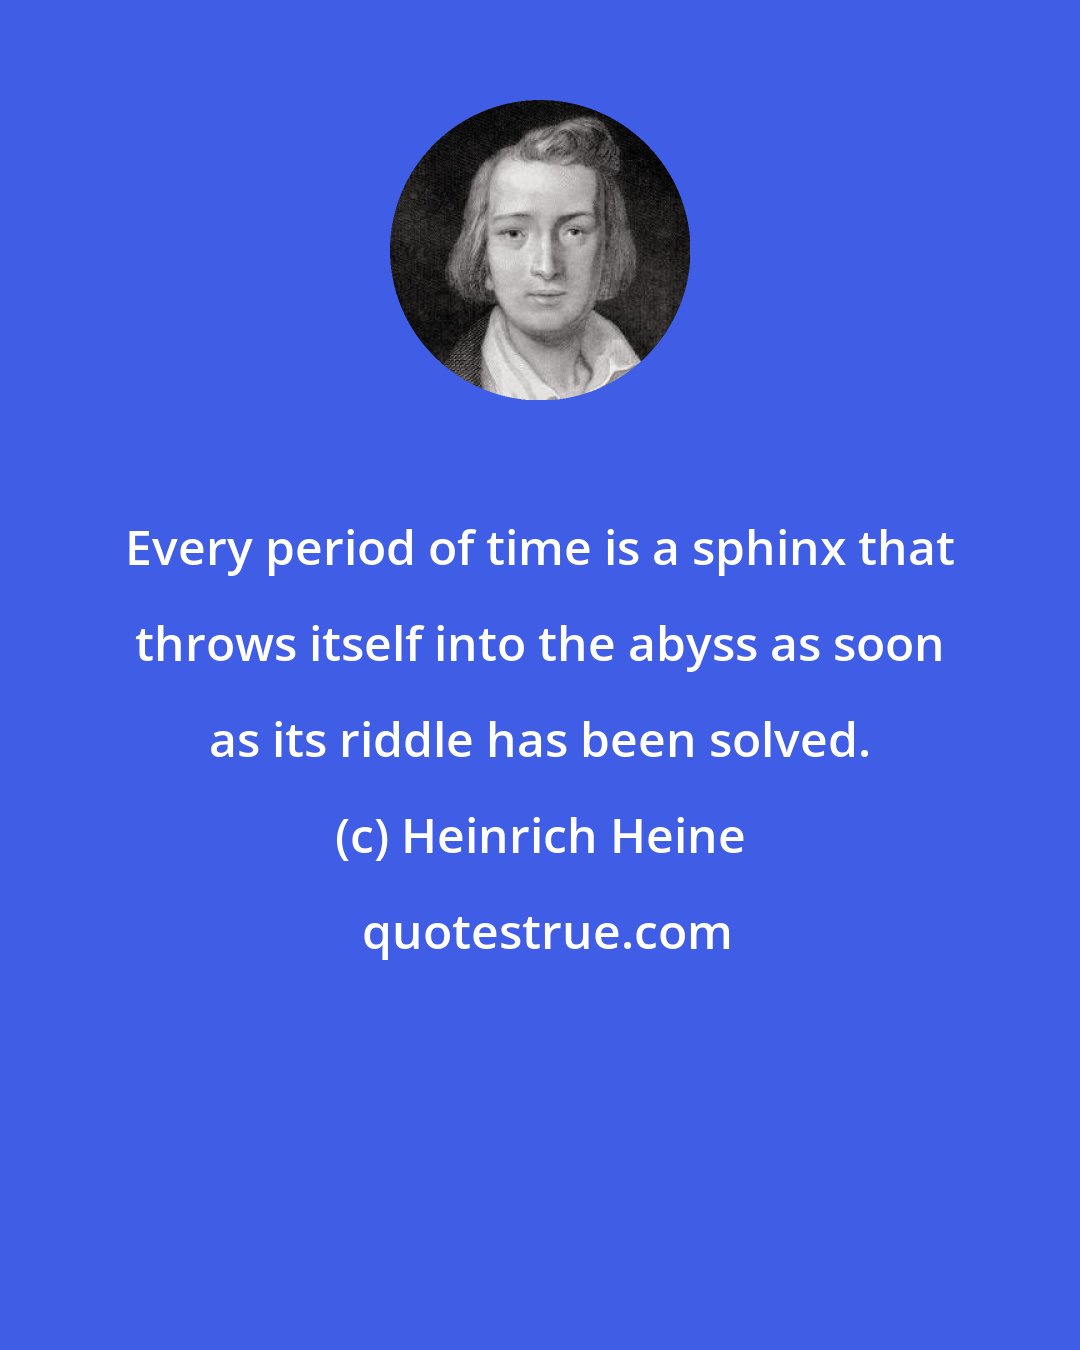 Heinrich Heine: Every period of time is a sphinx that throws itself into the abyss as soon as its riddle has been solved.